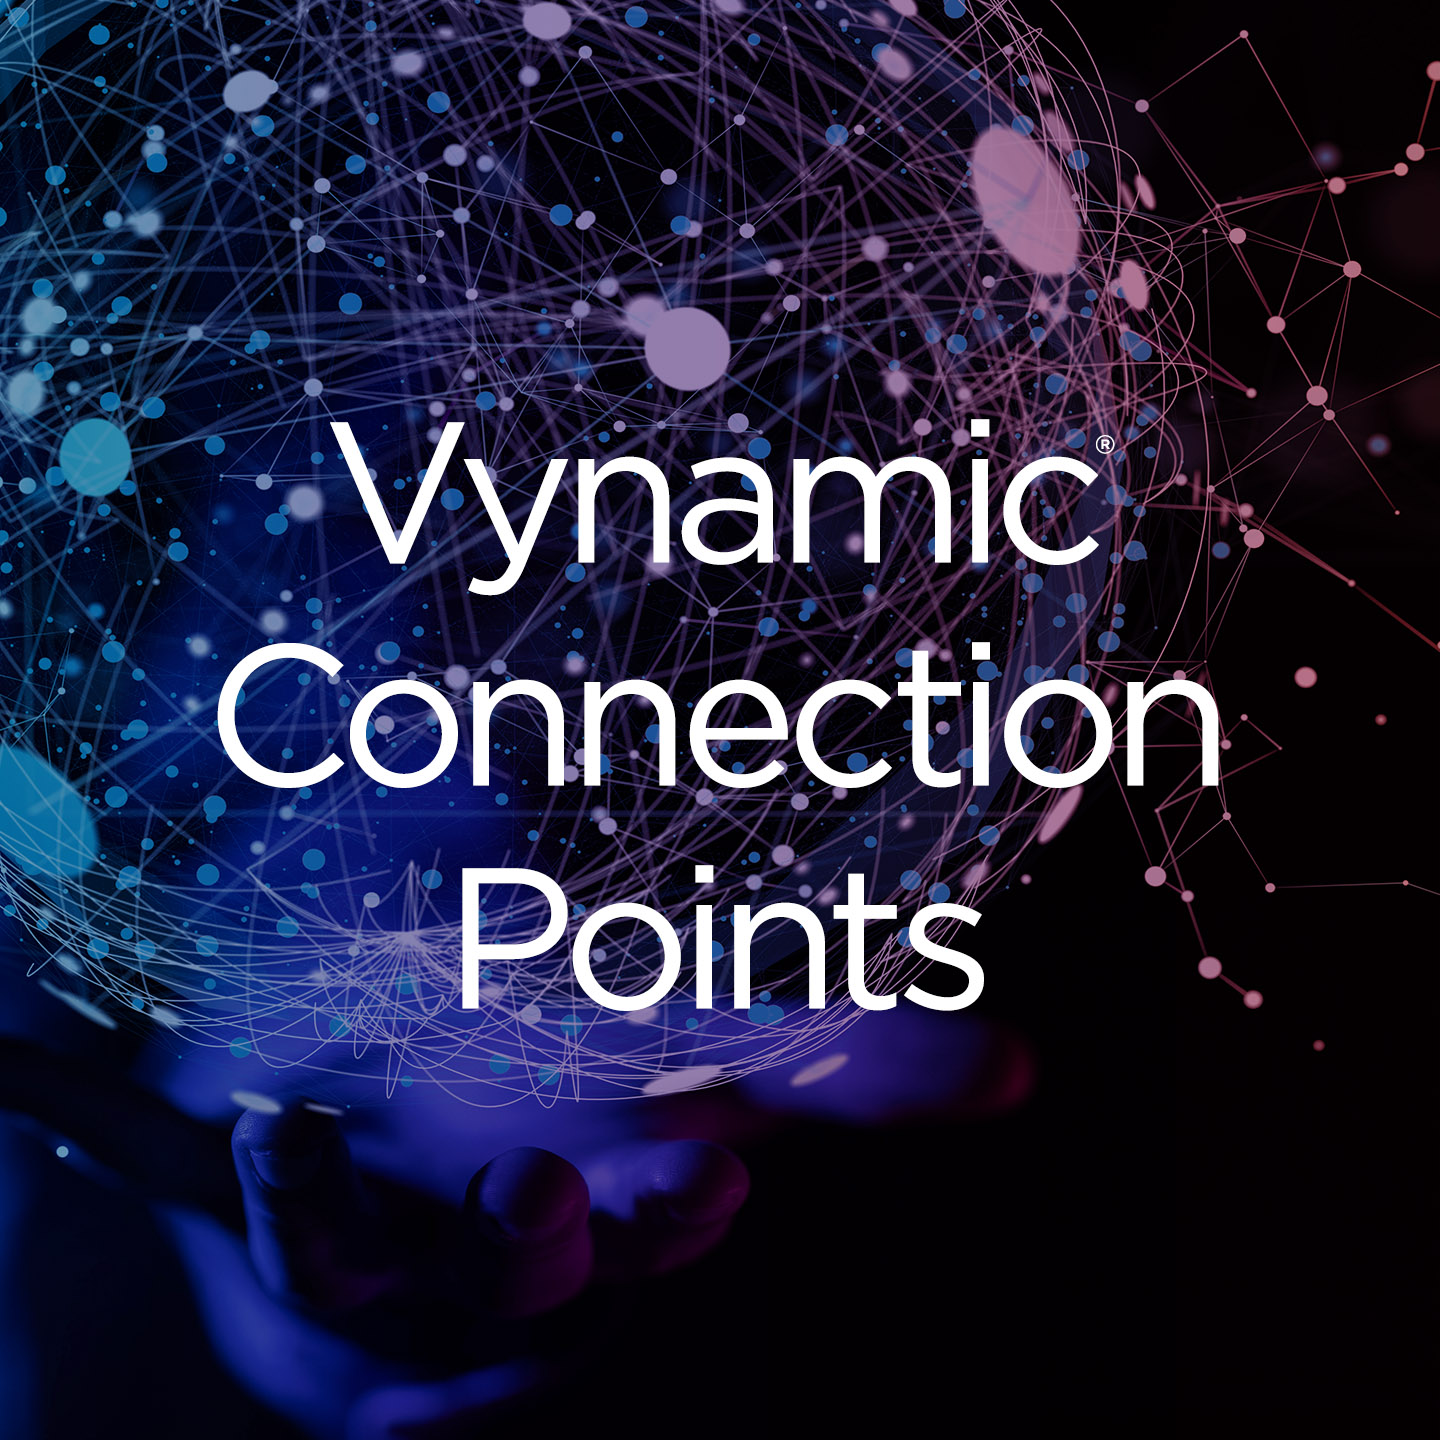 Vynamic Connection Points